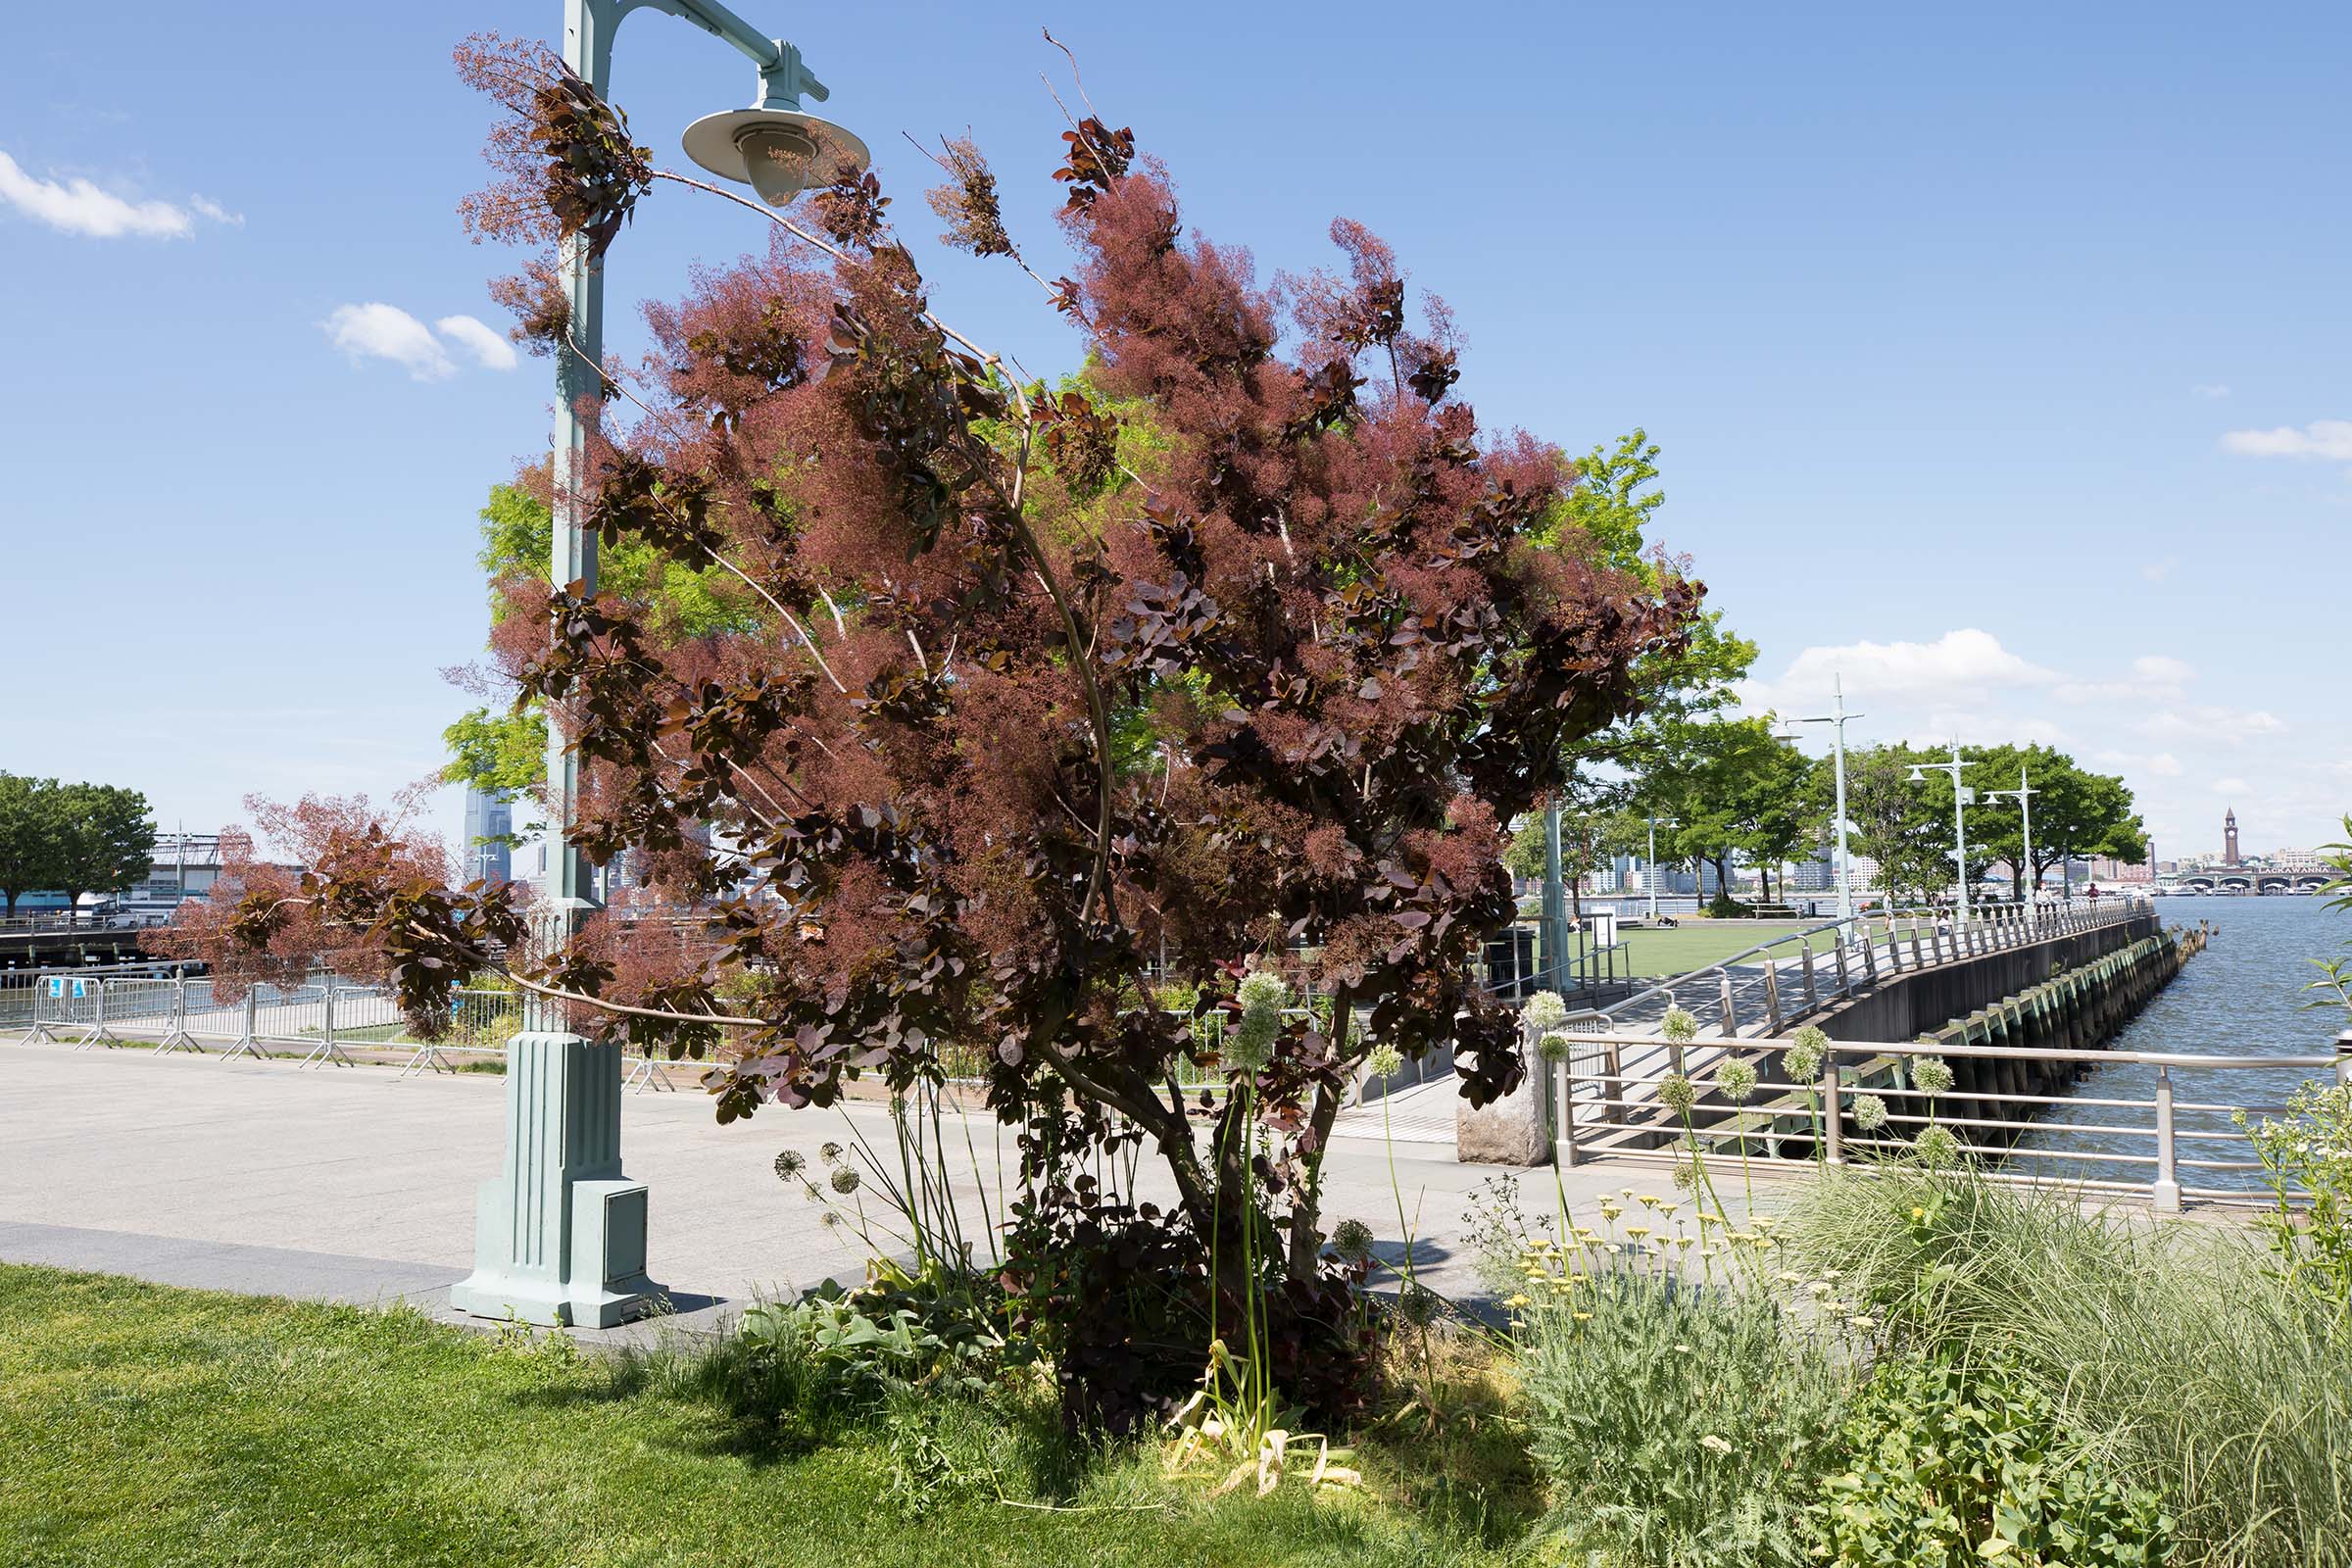 The red and brown smoketree has small branches and bush like structure